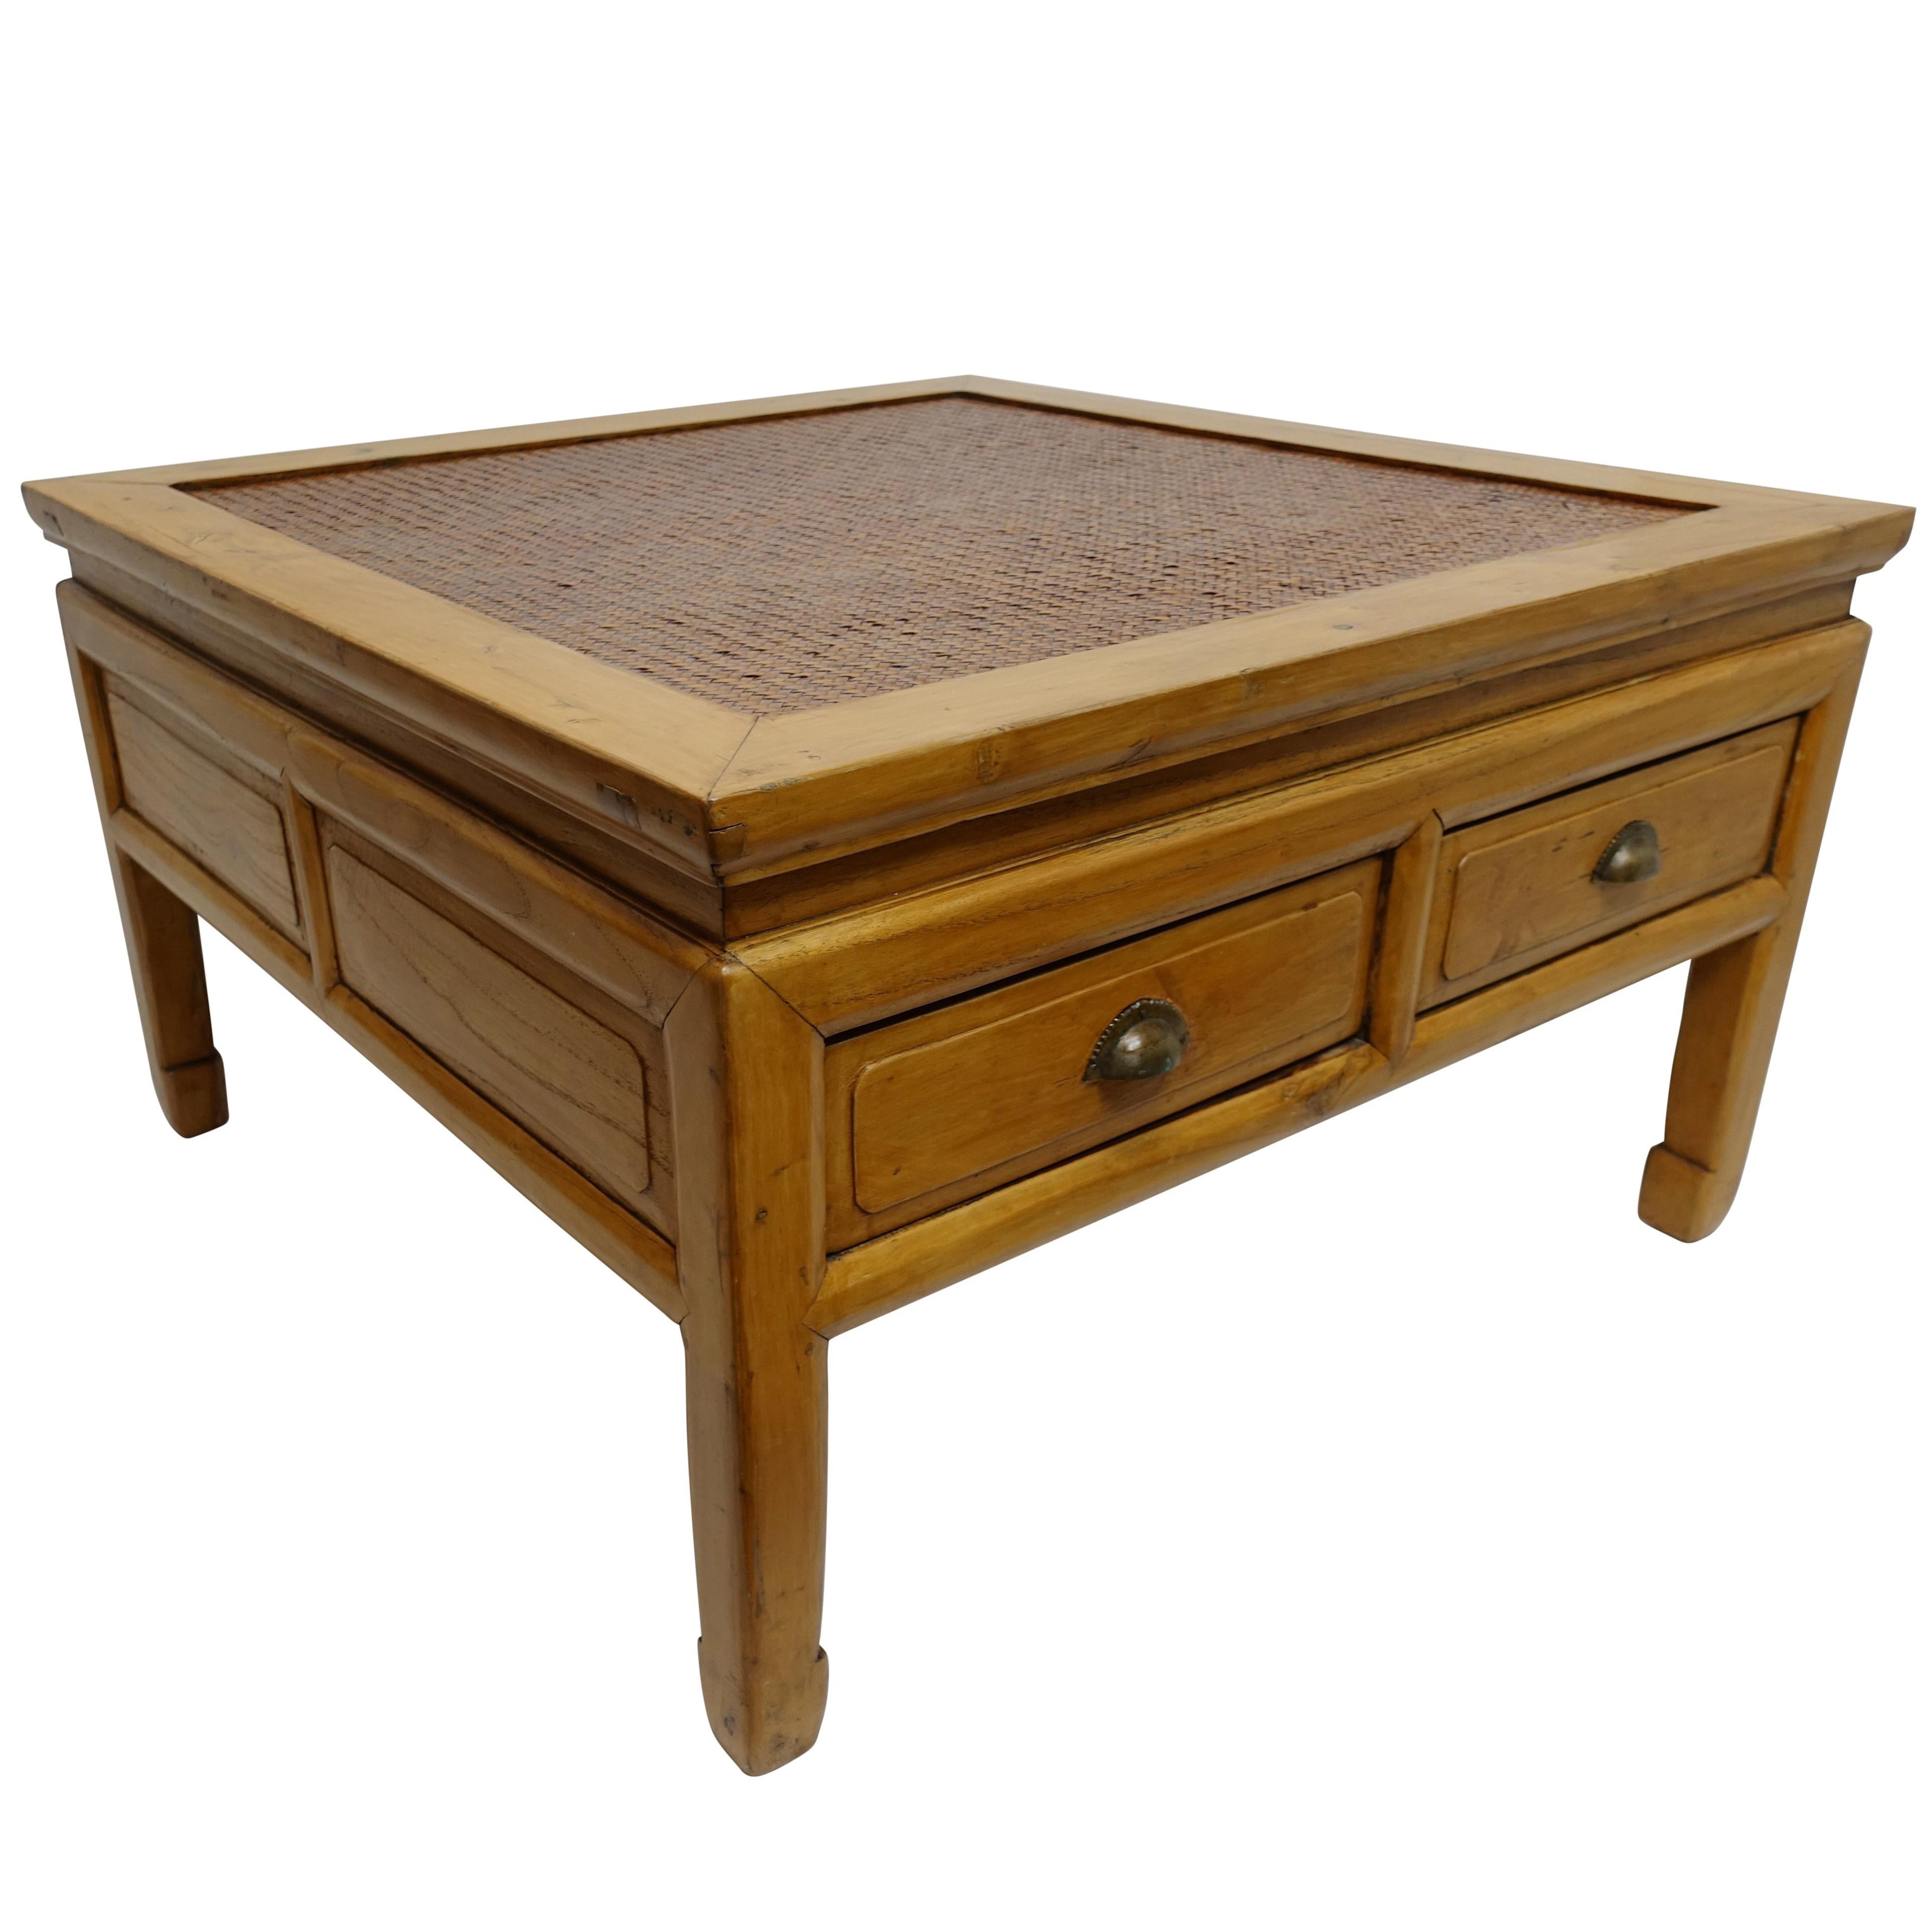 Chinese Low Table with Woven Panel Top